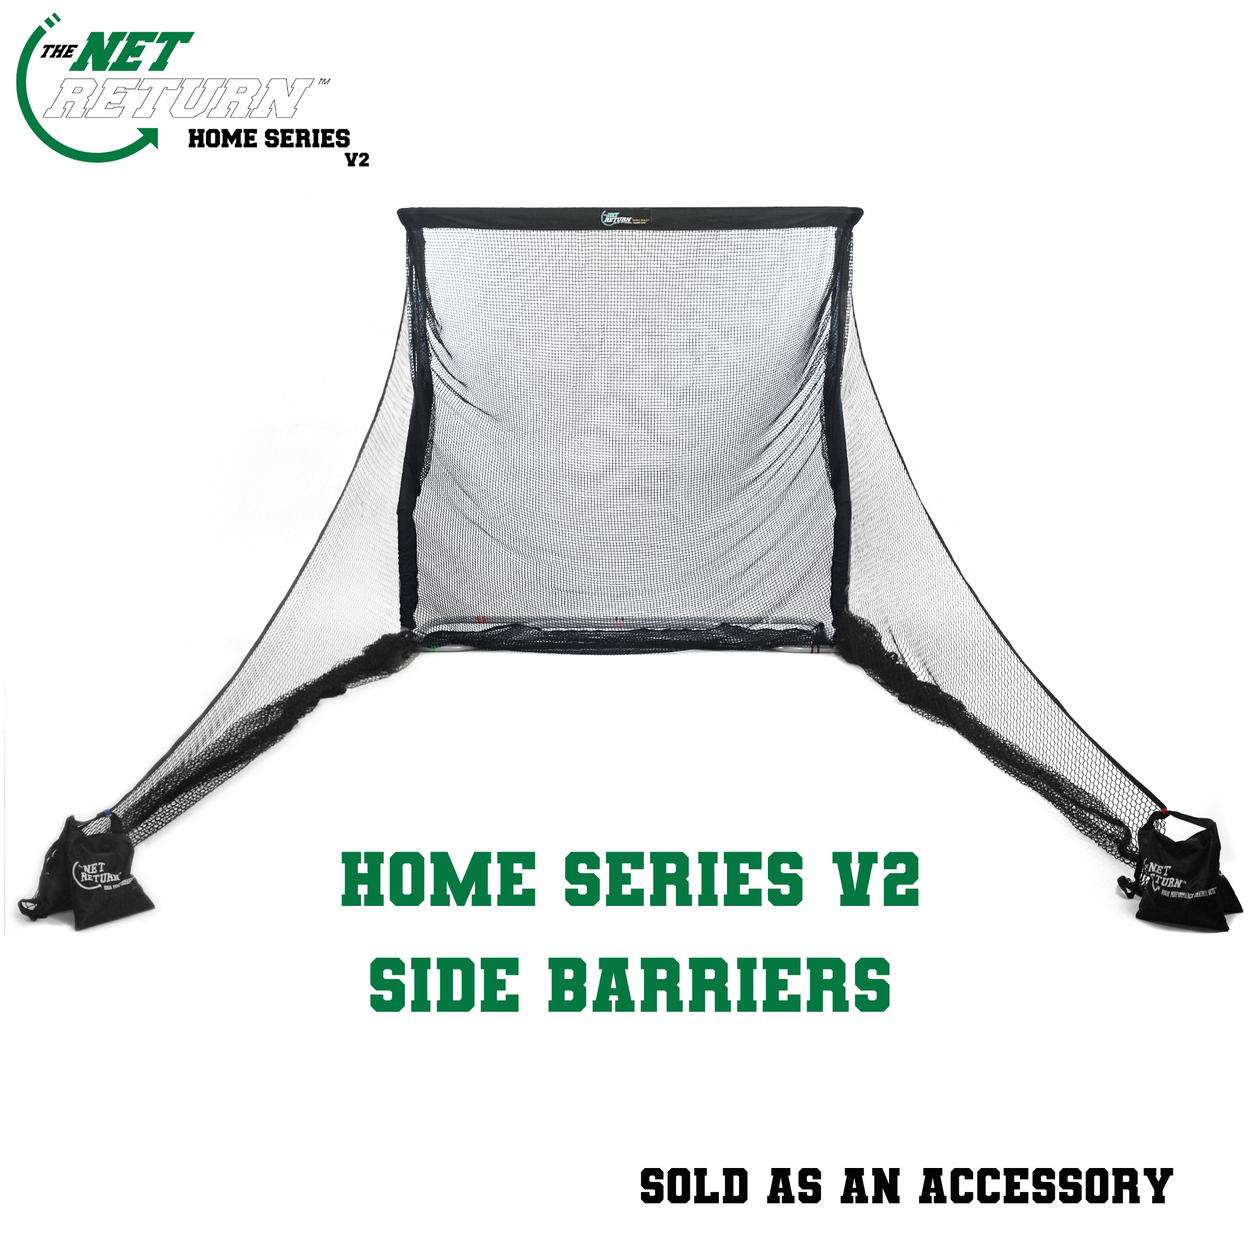 Net Return Series, with Side Barriers